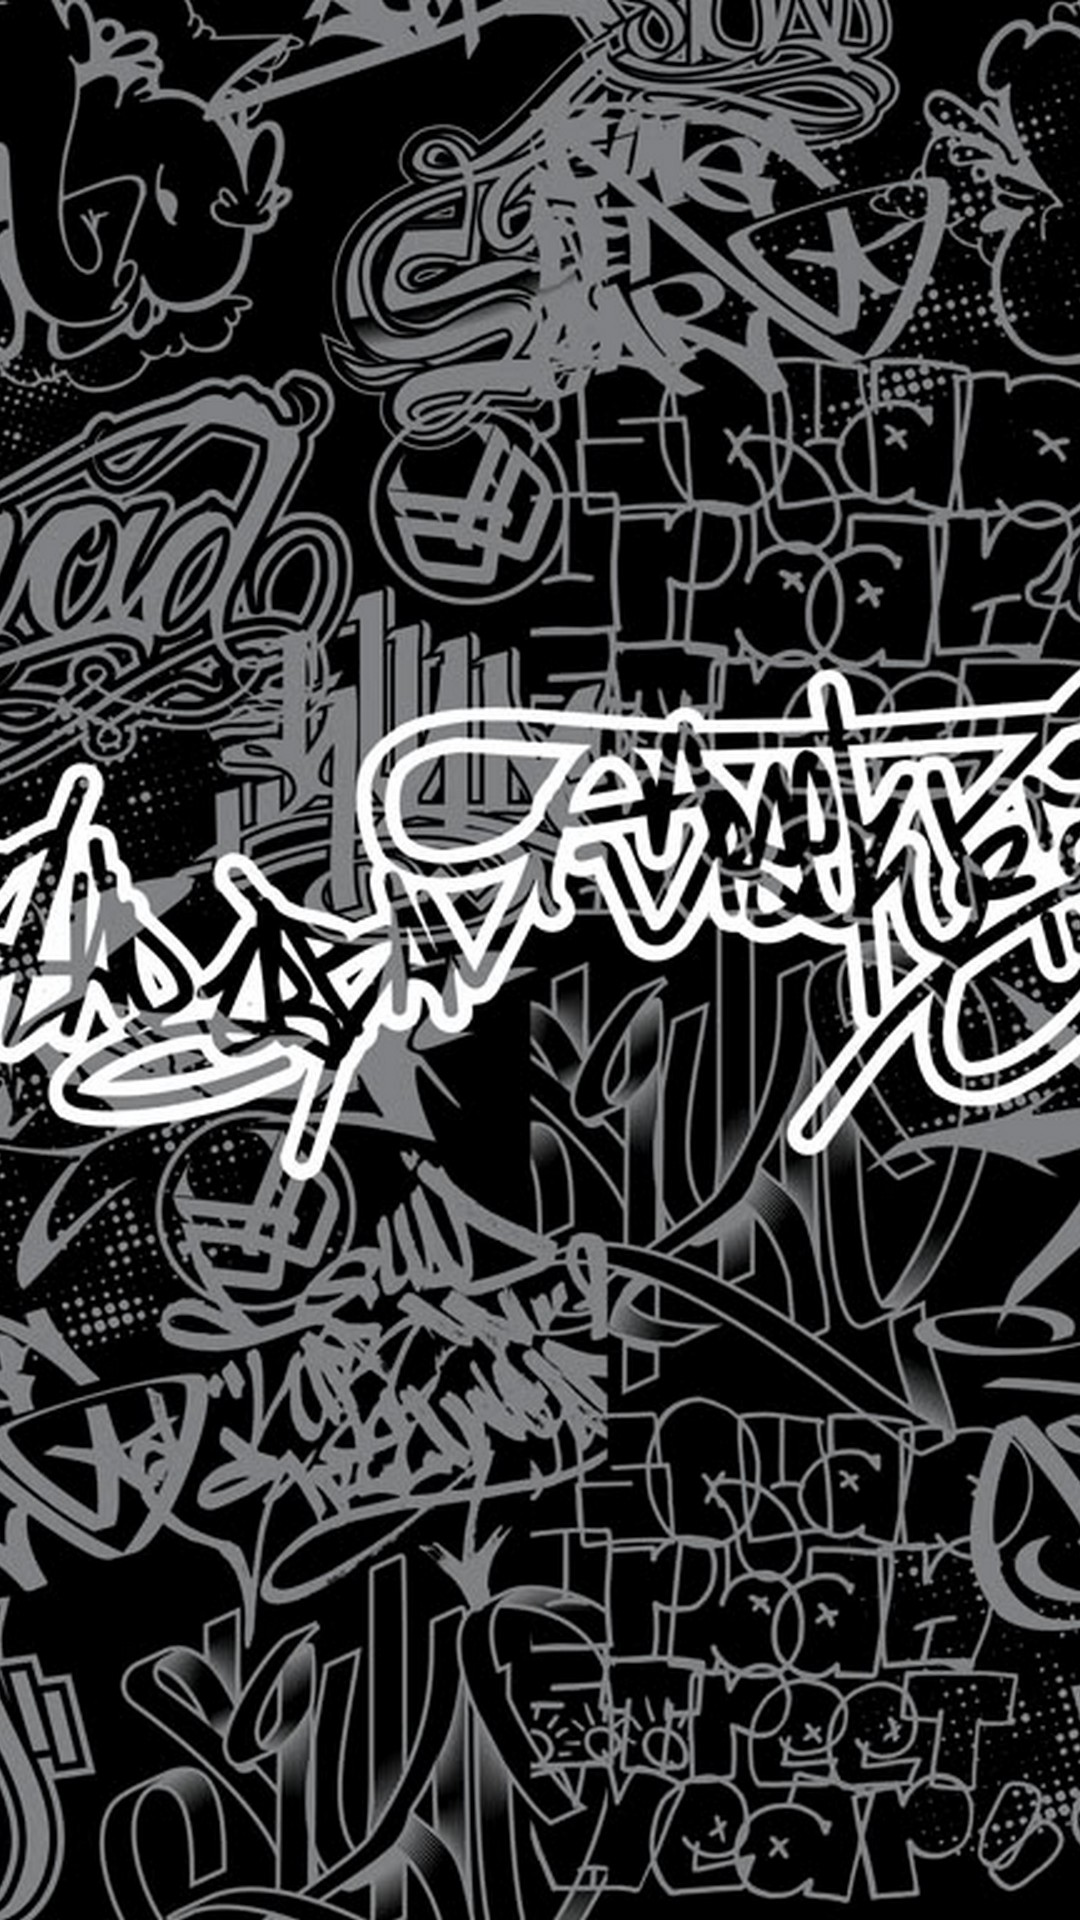 Graffiti Letters iPhone Wallpaper with image resolution 1080x1920 pixel. You can make this wallpaper for your iPhone 5, 6, 7, 8, X backgrounds, Mobile Screensaver, or iPad Lock Screen